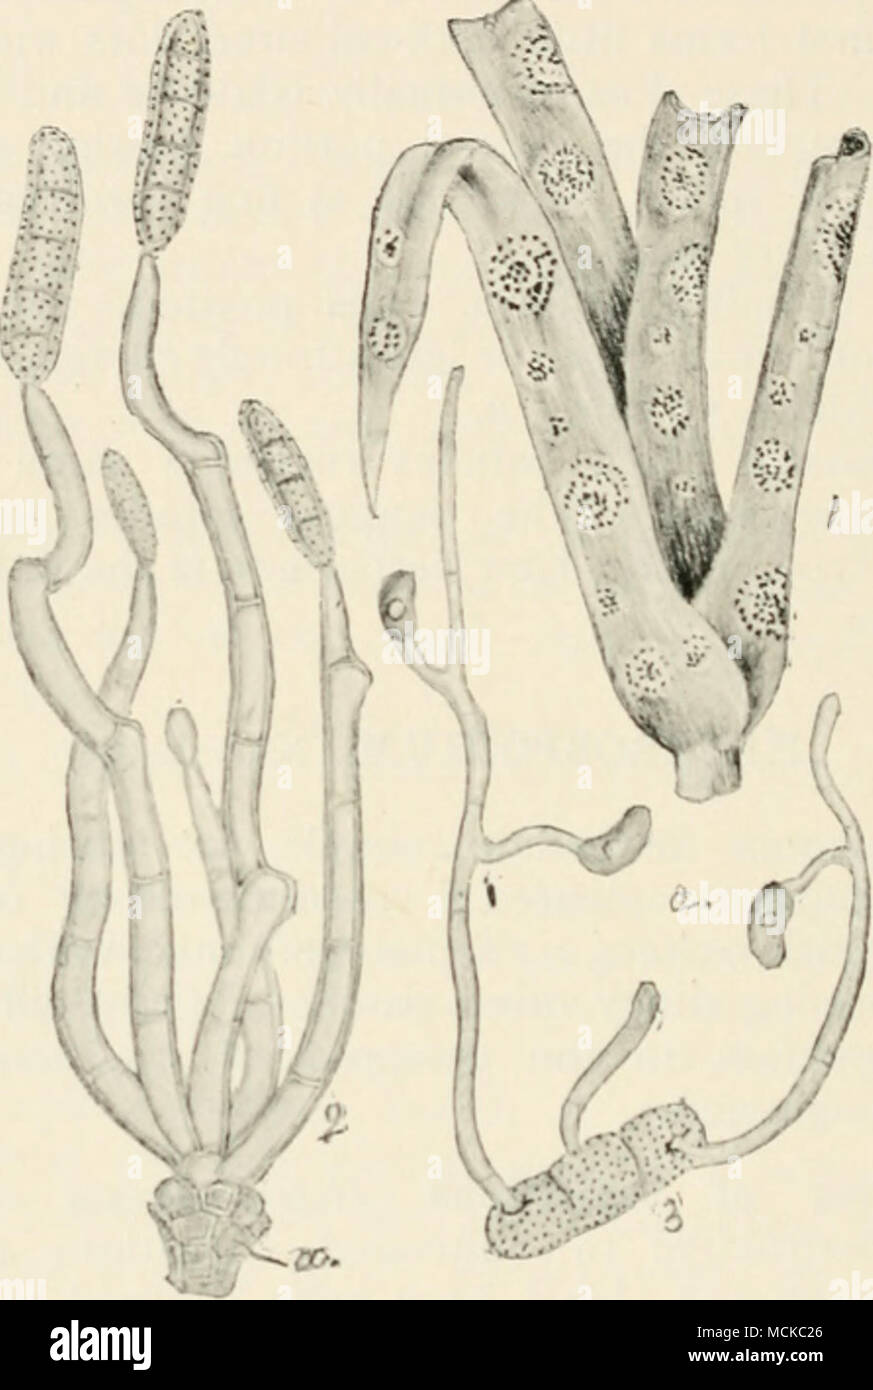 . Fig. ^o.—IIi-tcrosporium cchinulatum. i, portion of a diseased carnation ; 2, cluster of conidiophores bearing coniiiia; 3, conidium germinating, and producing secondary spores. Figs. 2 and 3 highly mag. leaves of a plant are attacked, owing to the spores being washed from one leaf to another. When the fungus is mature the tissue of tlie injured spots becomes brown, and often crumbles away leaving a hole. On cultivated species of Auricula. Excess of moisture favours the parasite. Spray with potassium sulphide and ventilate well. Stock Photo